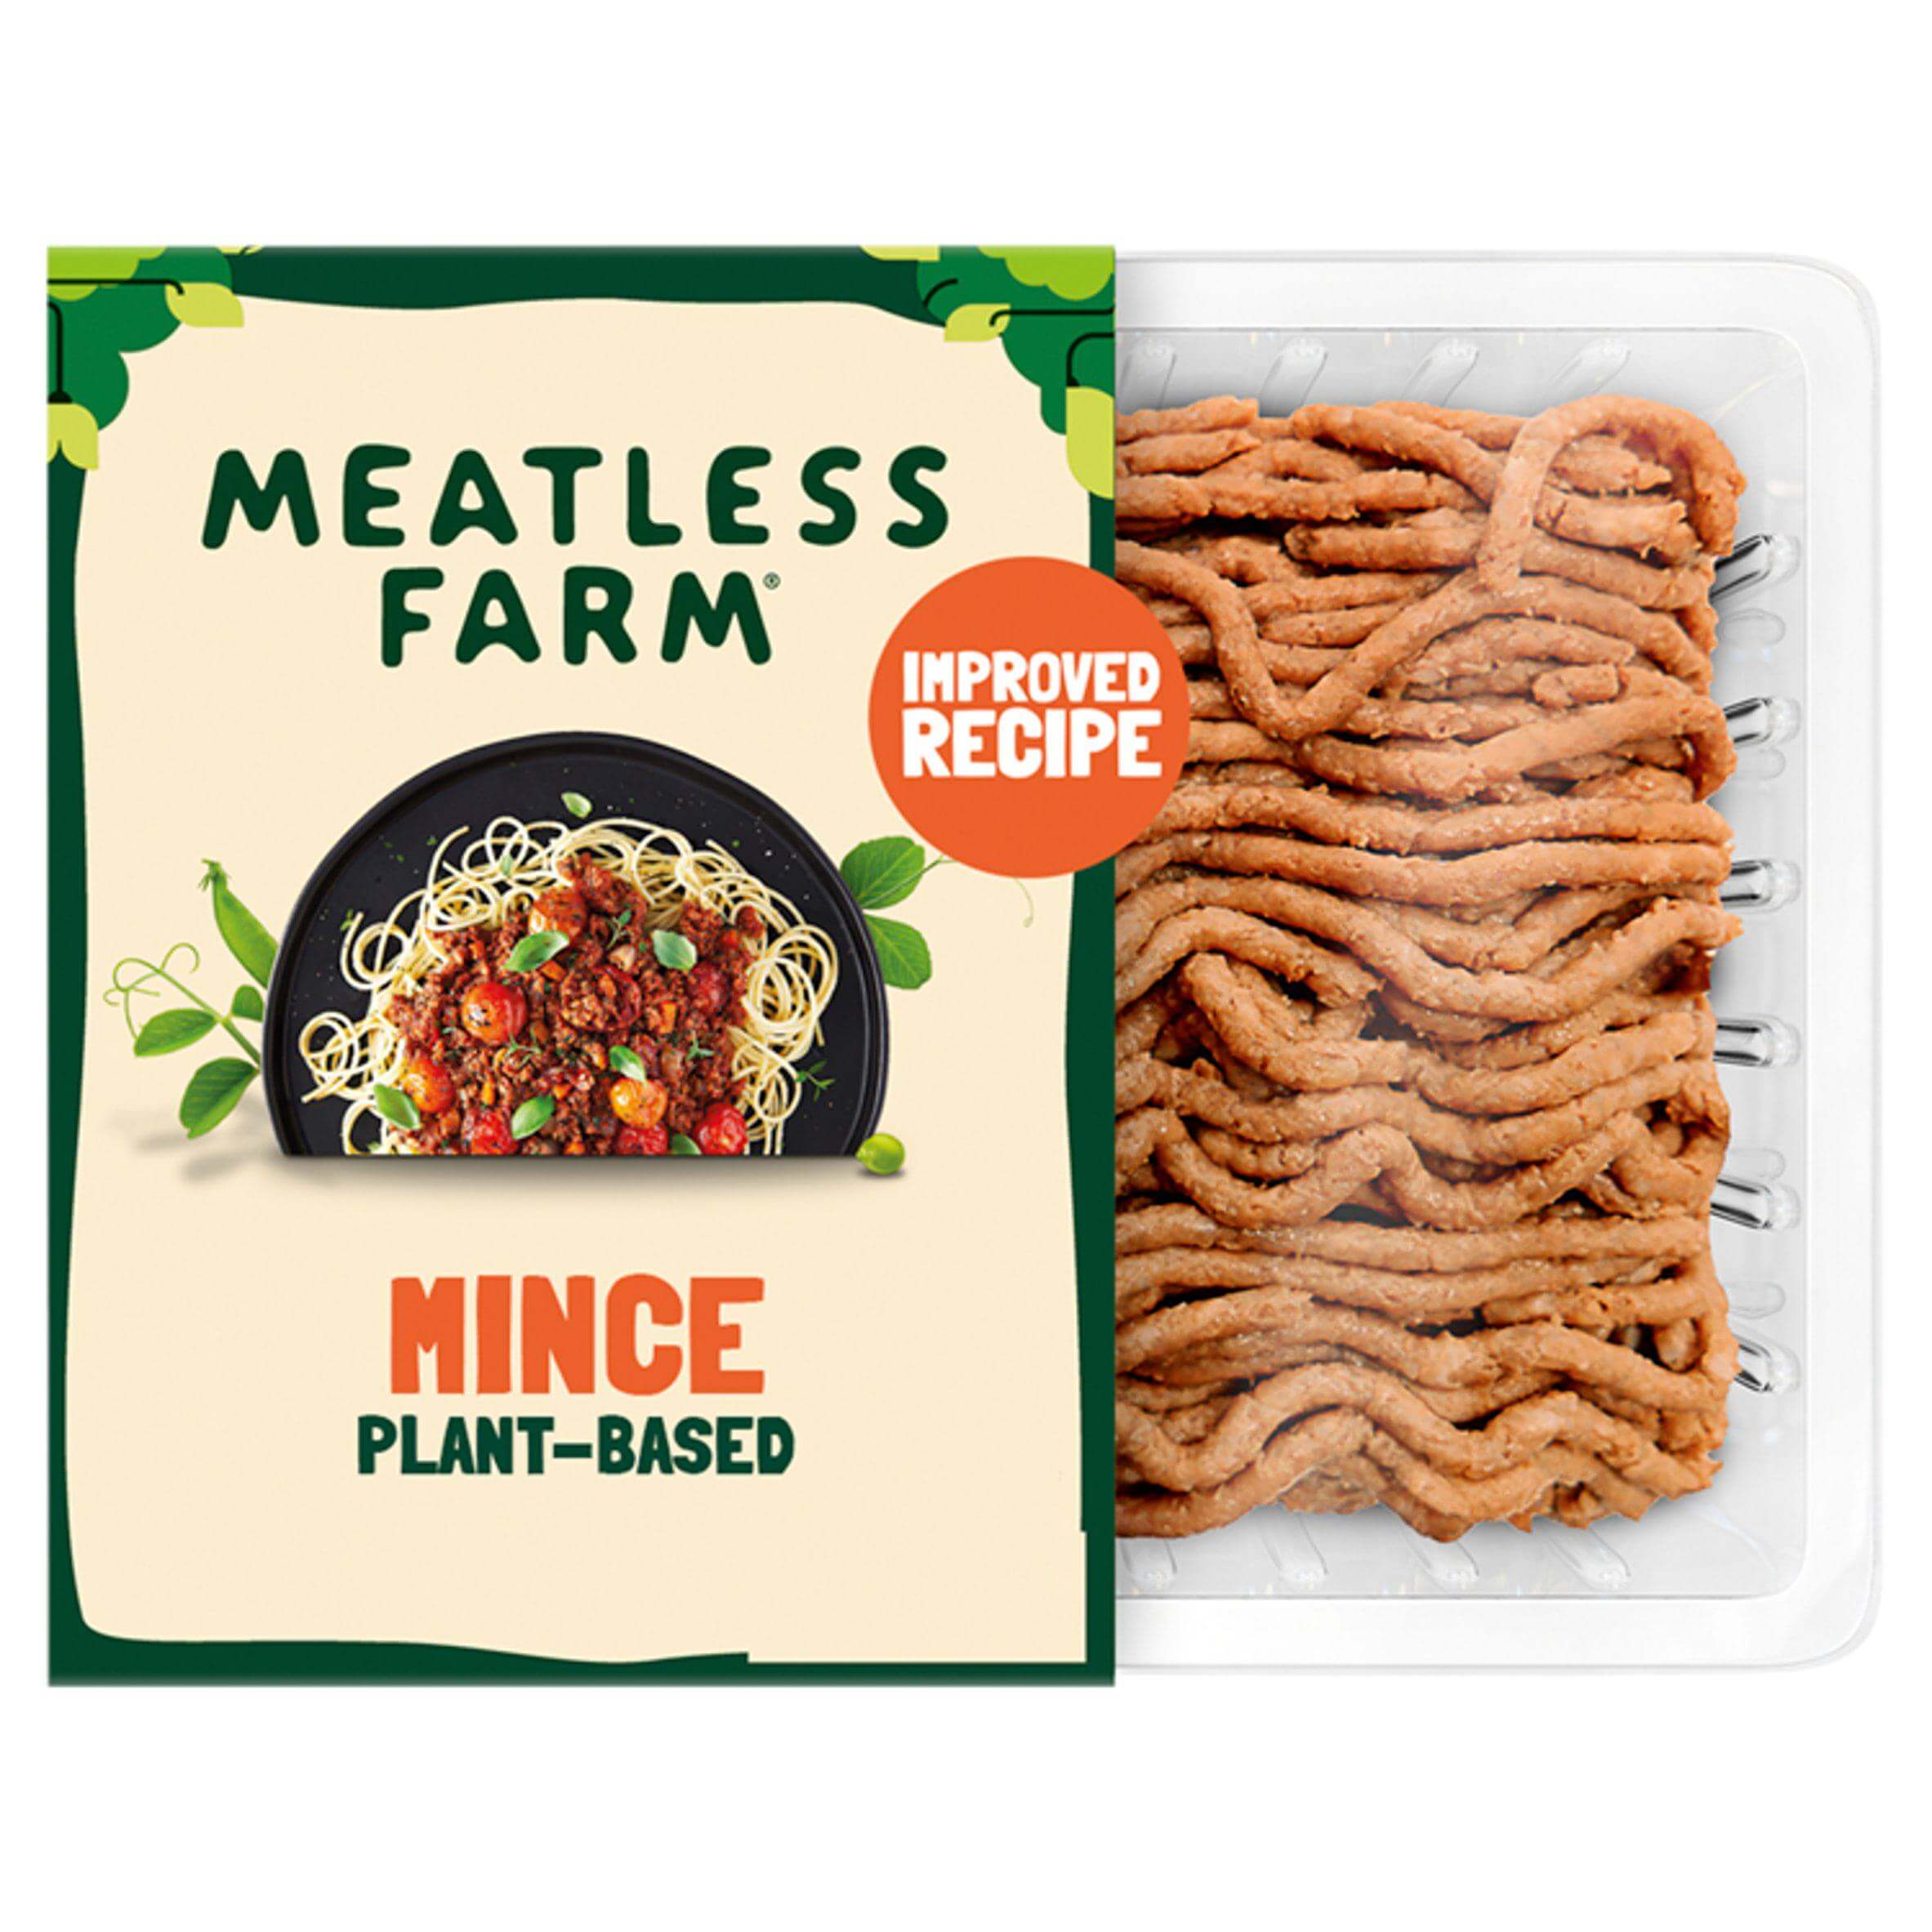 Image of Plant-Based Mince by The Meatless Farm Co., designed, produced or made in the UK. Buying this product supports a UK business, jobs and the local community.